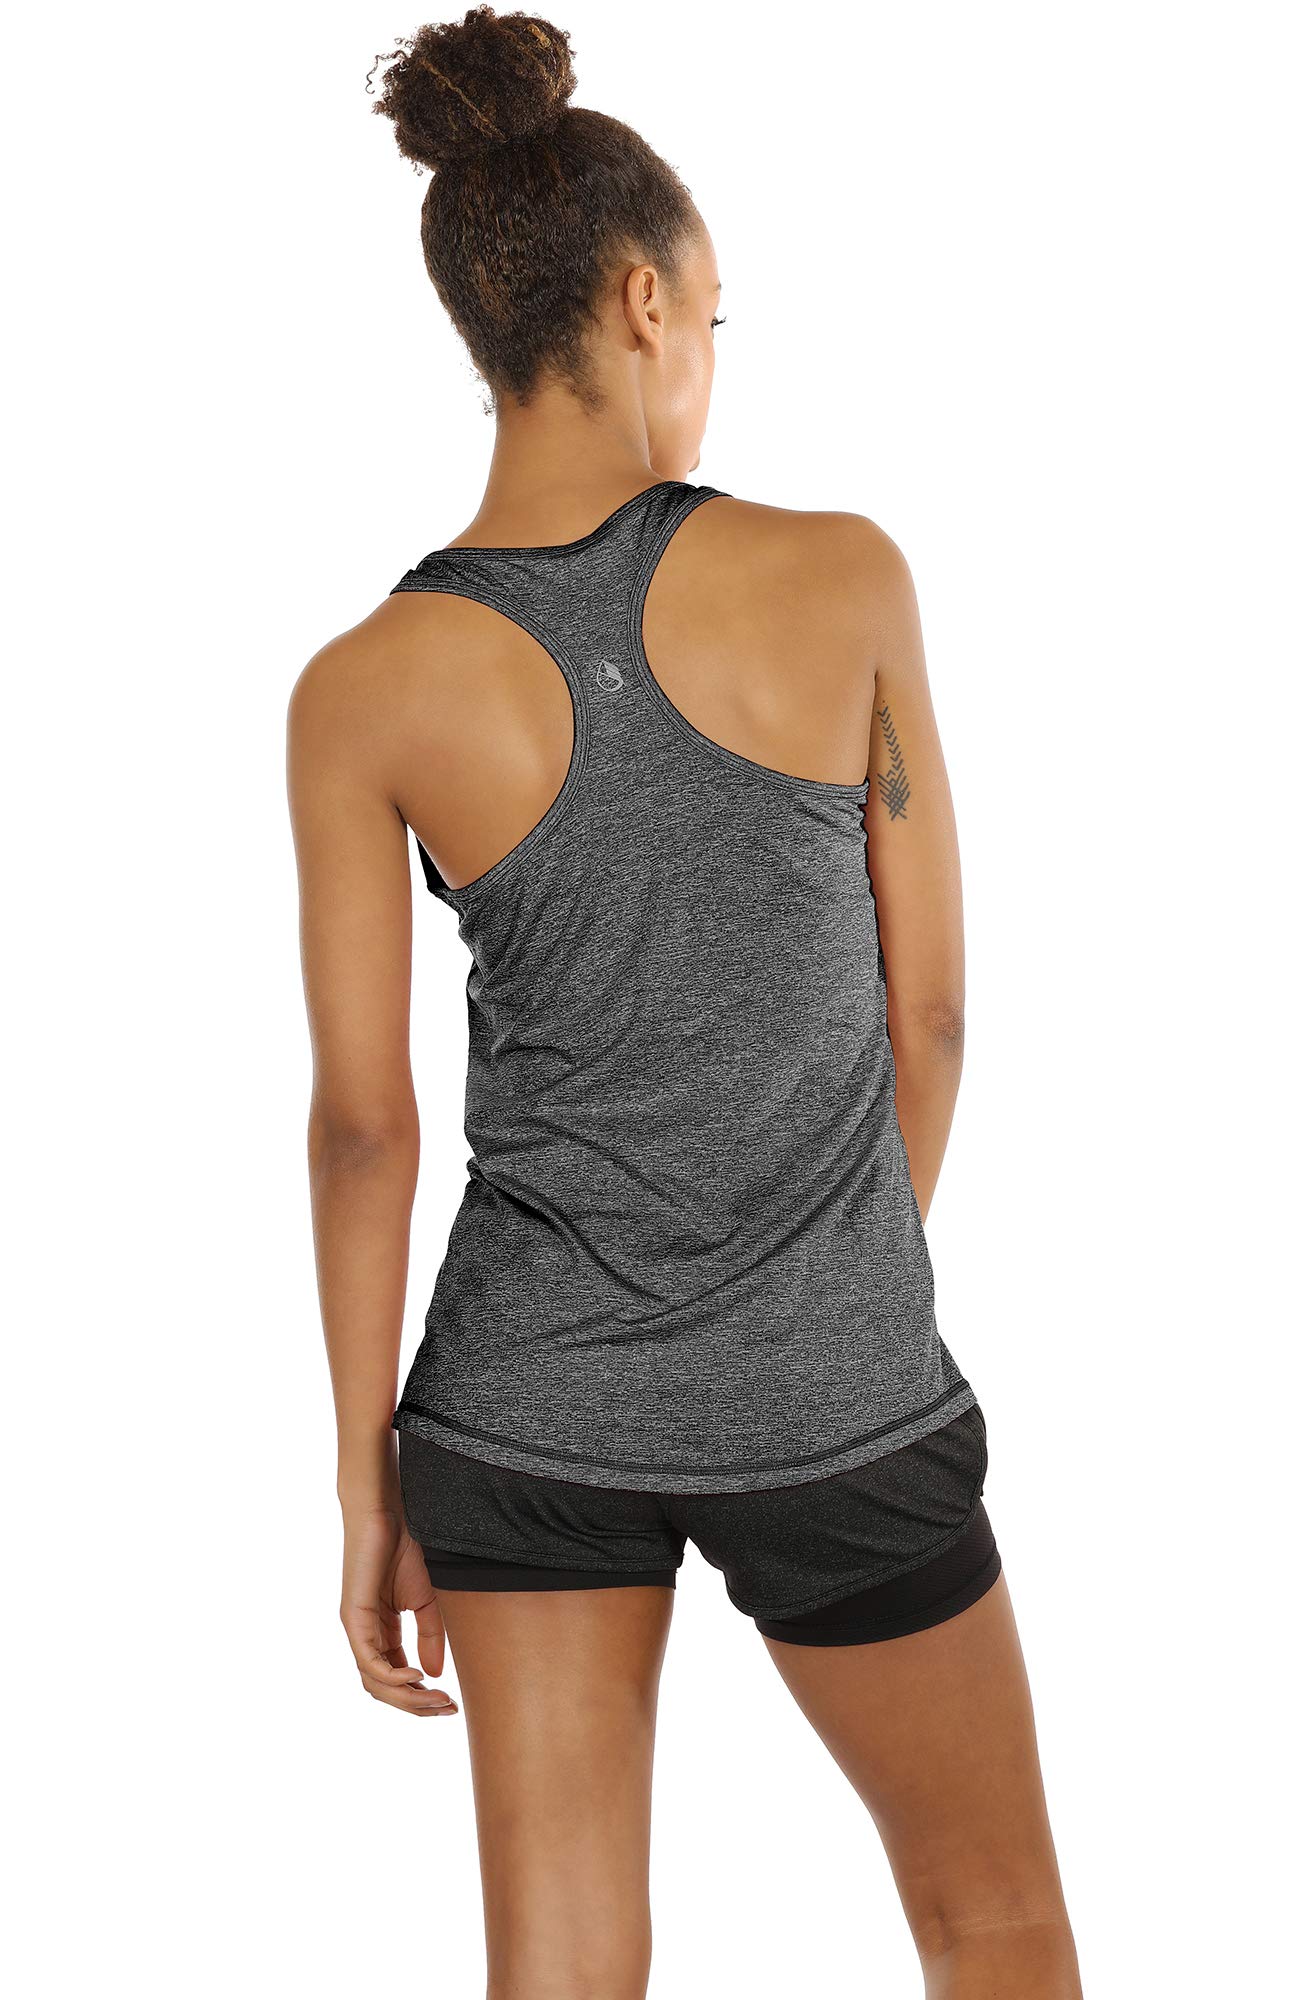 icyzone Women's Racerback Workout Athletic Running Tank Tops (Pack of 3)